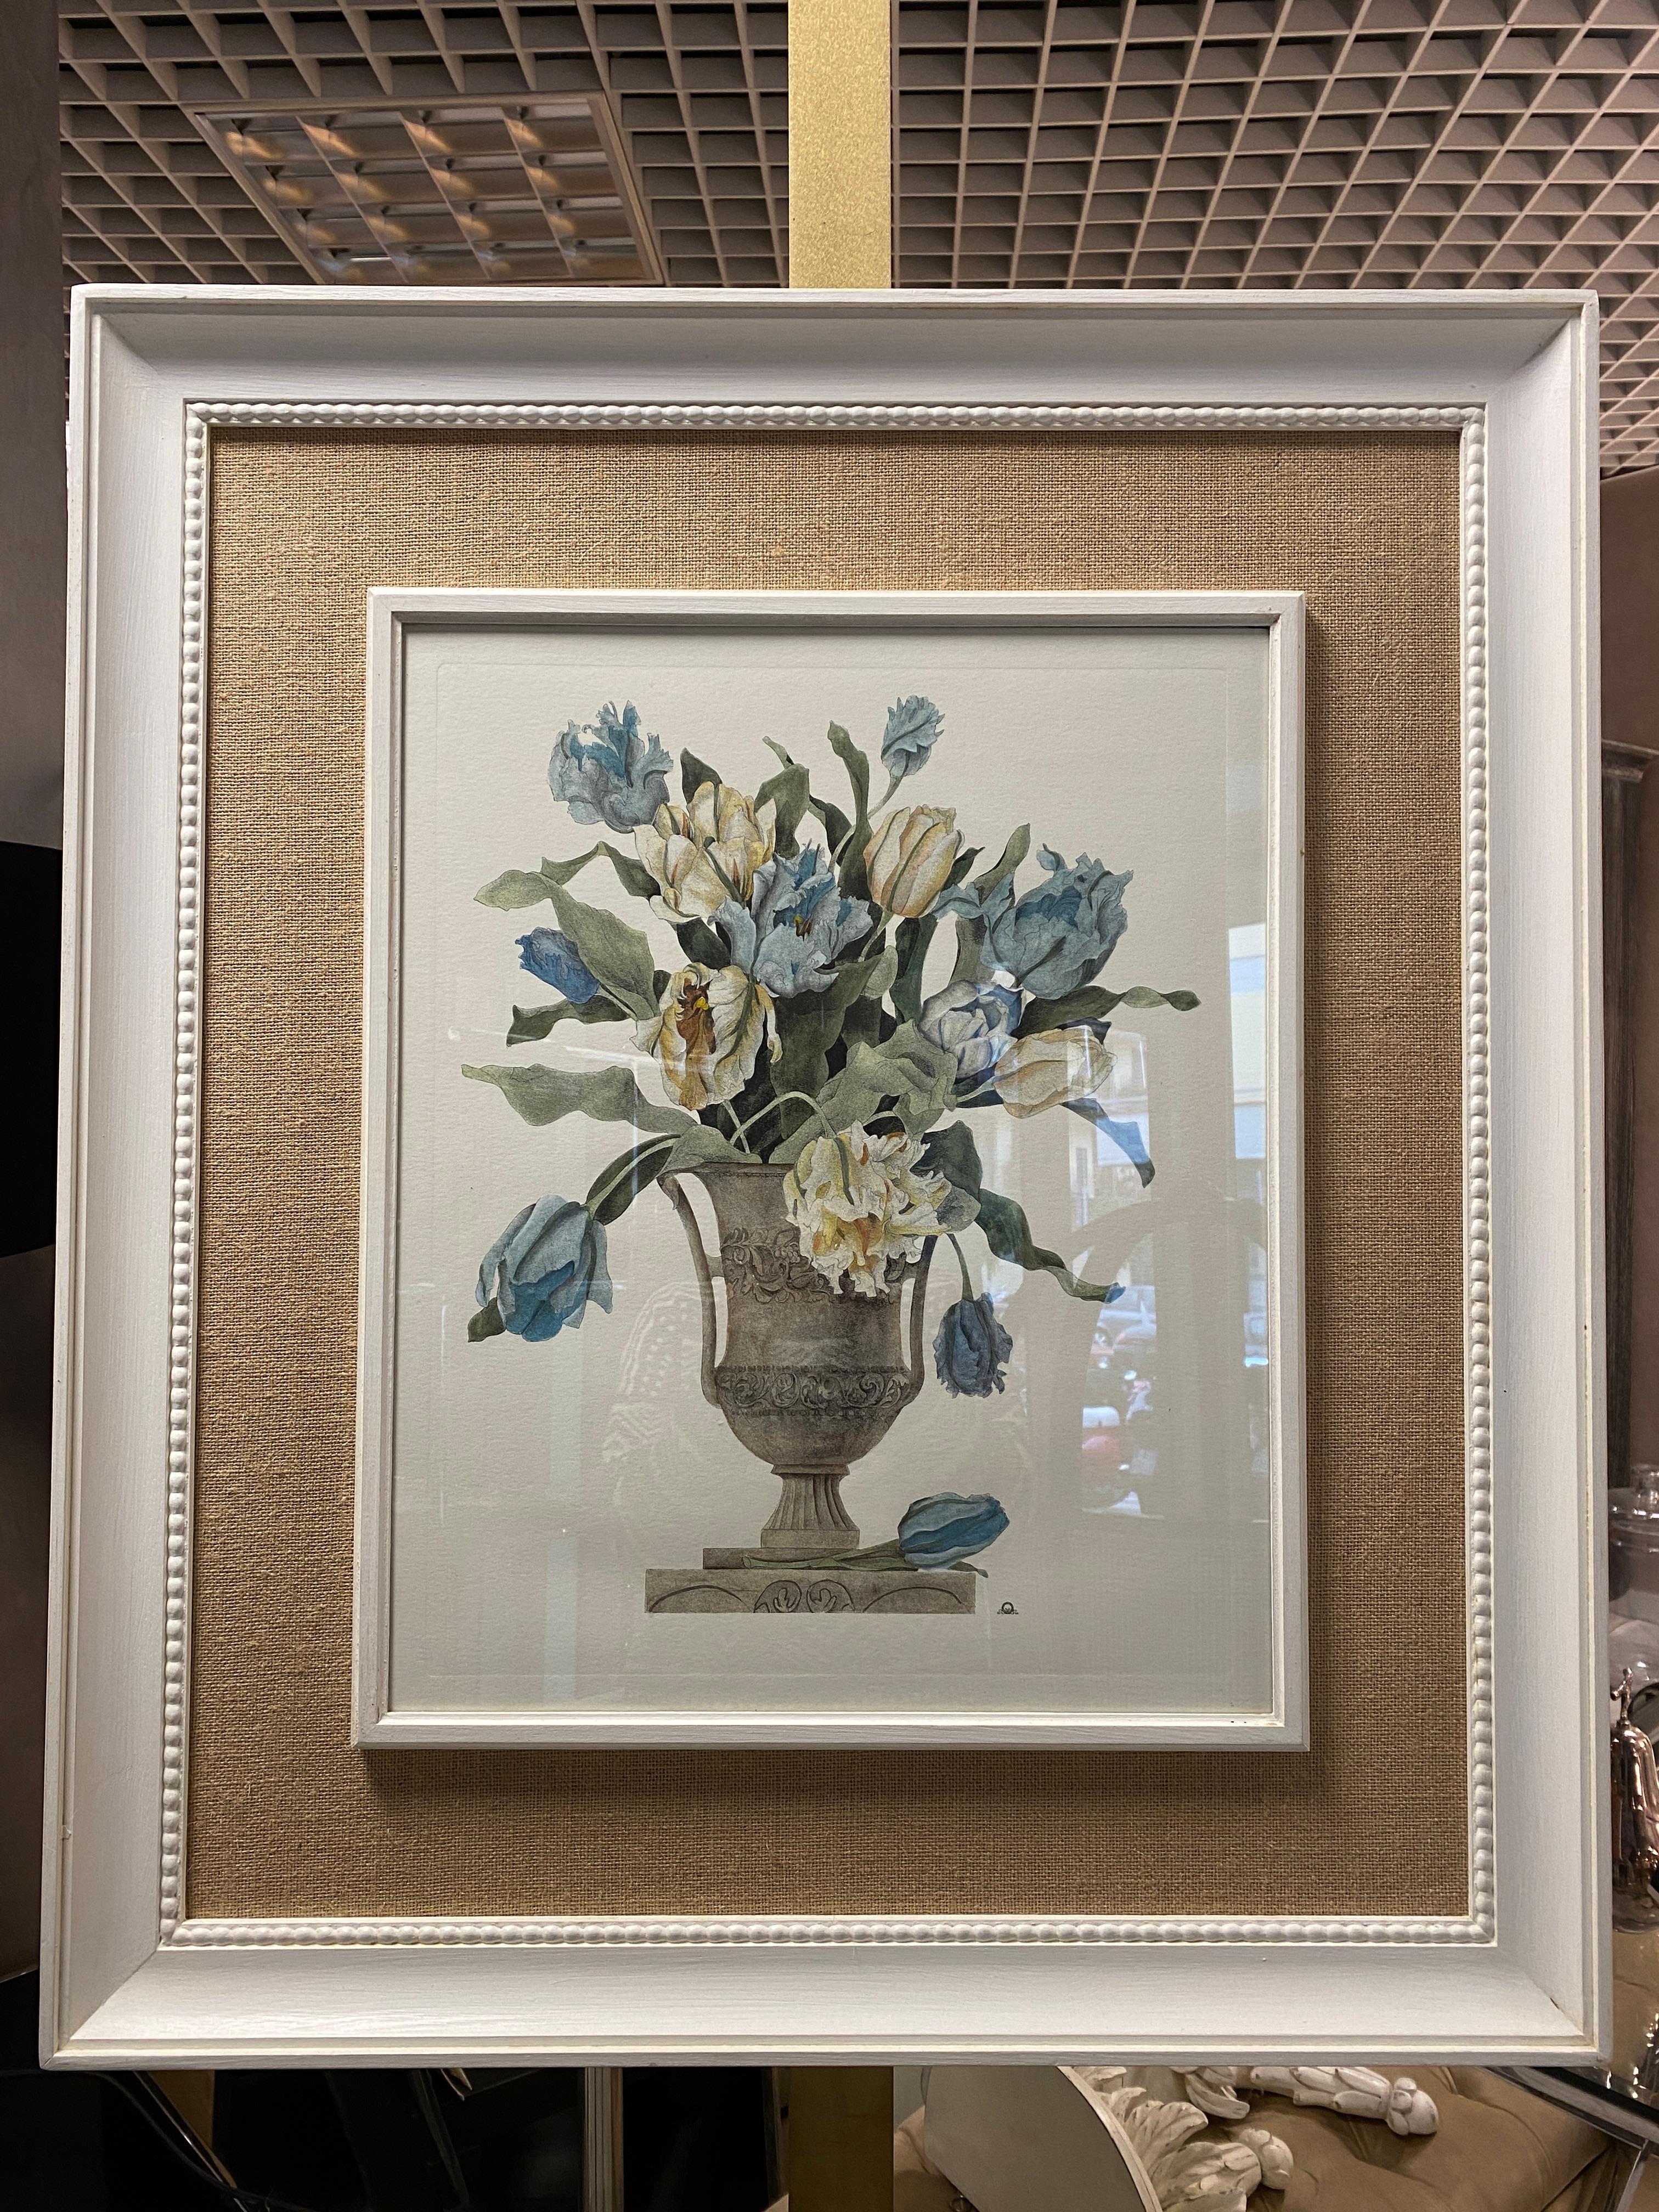 Print from the Collection Botanique representing Tulips Vase, with a beautiful wooden frame enriched with a jute passpartout, which brings out colors and nuances of watercolor colors.

Elegant and refined print representing a vase of flowers and,